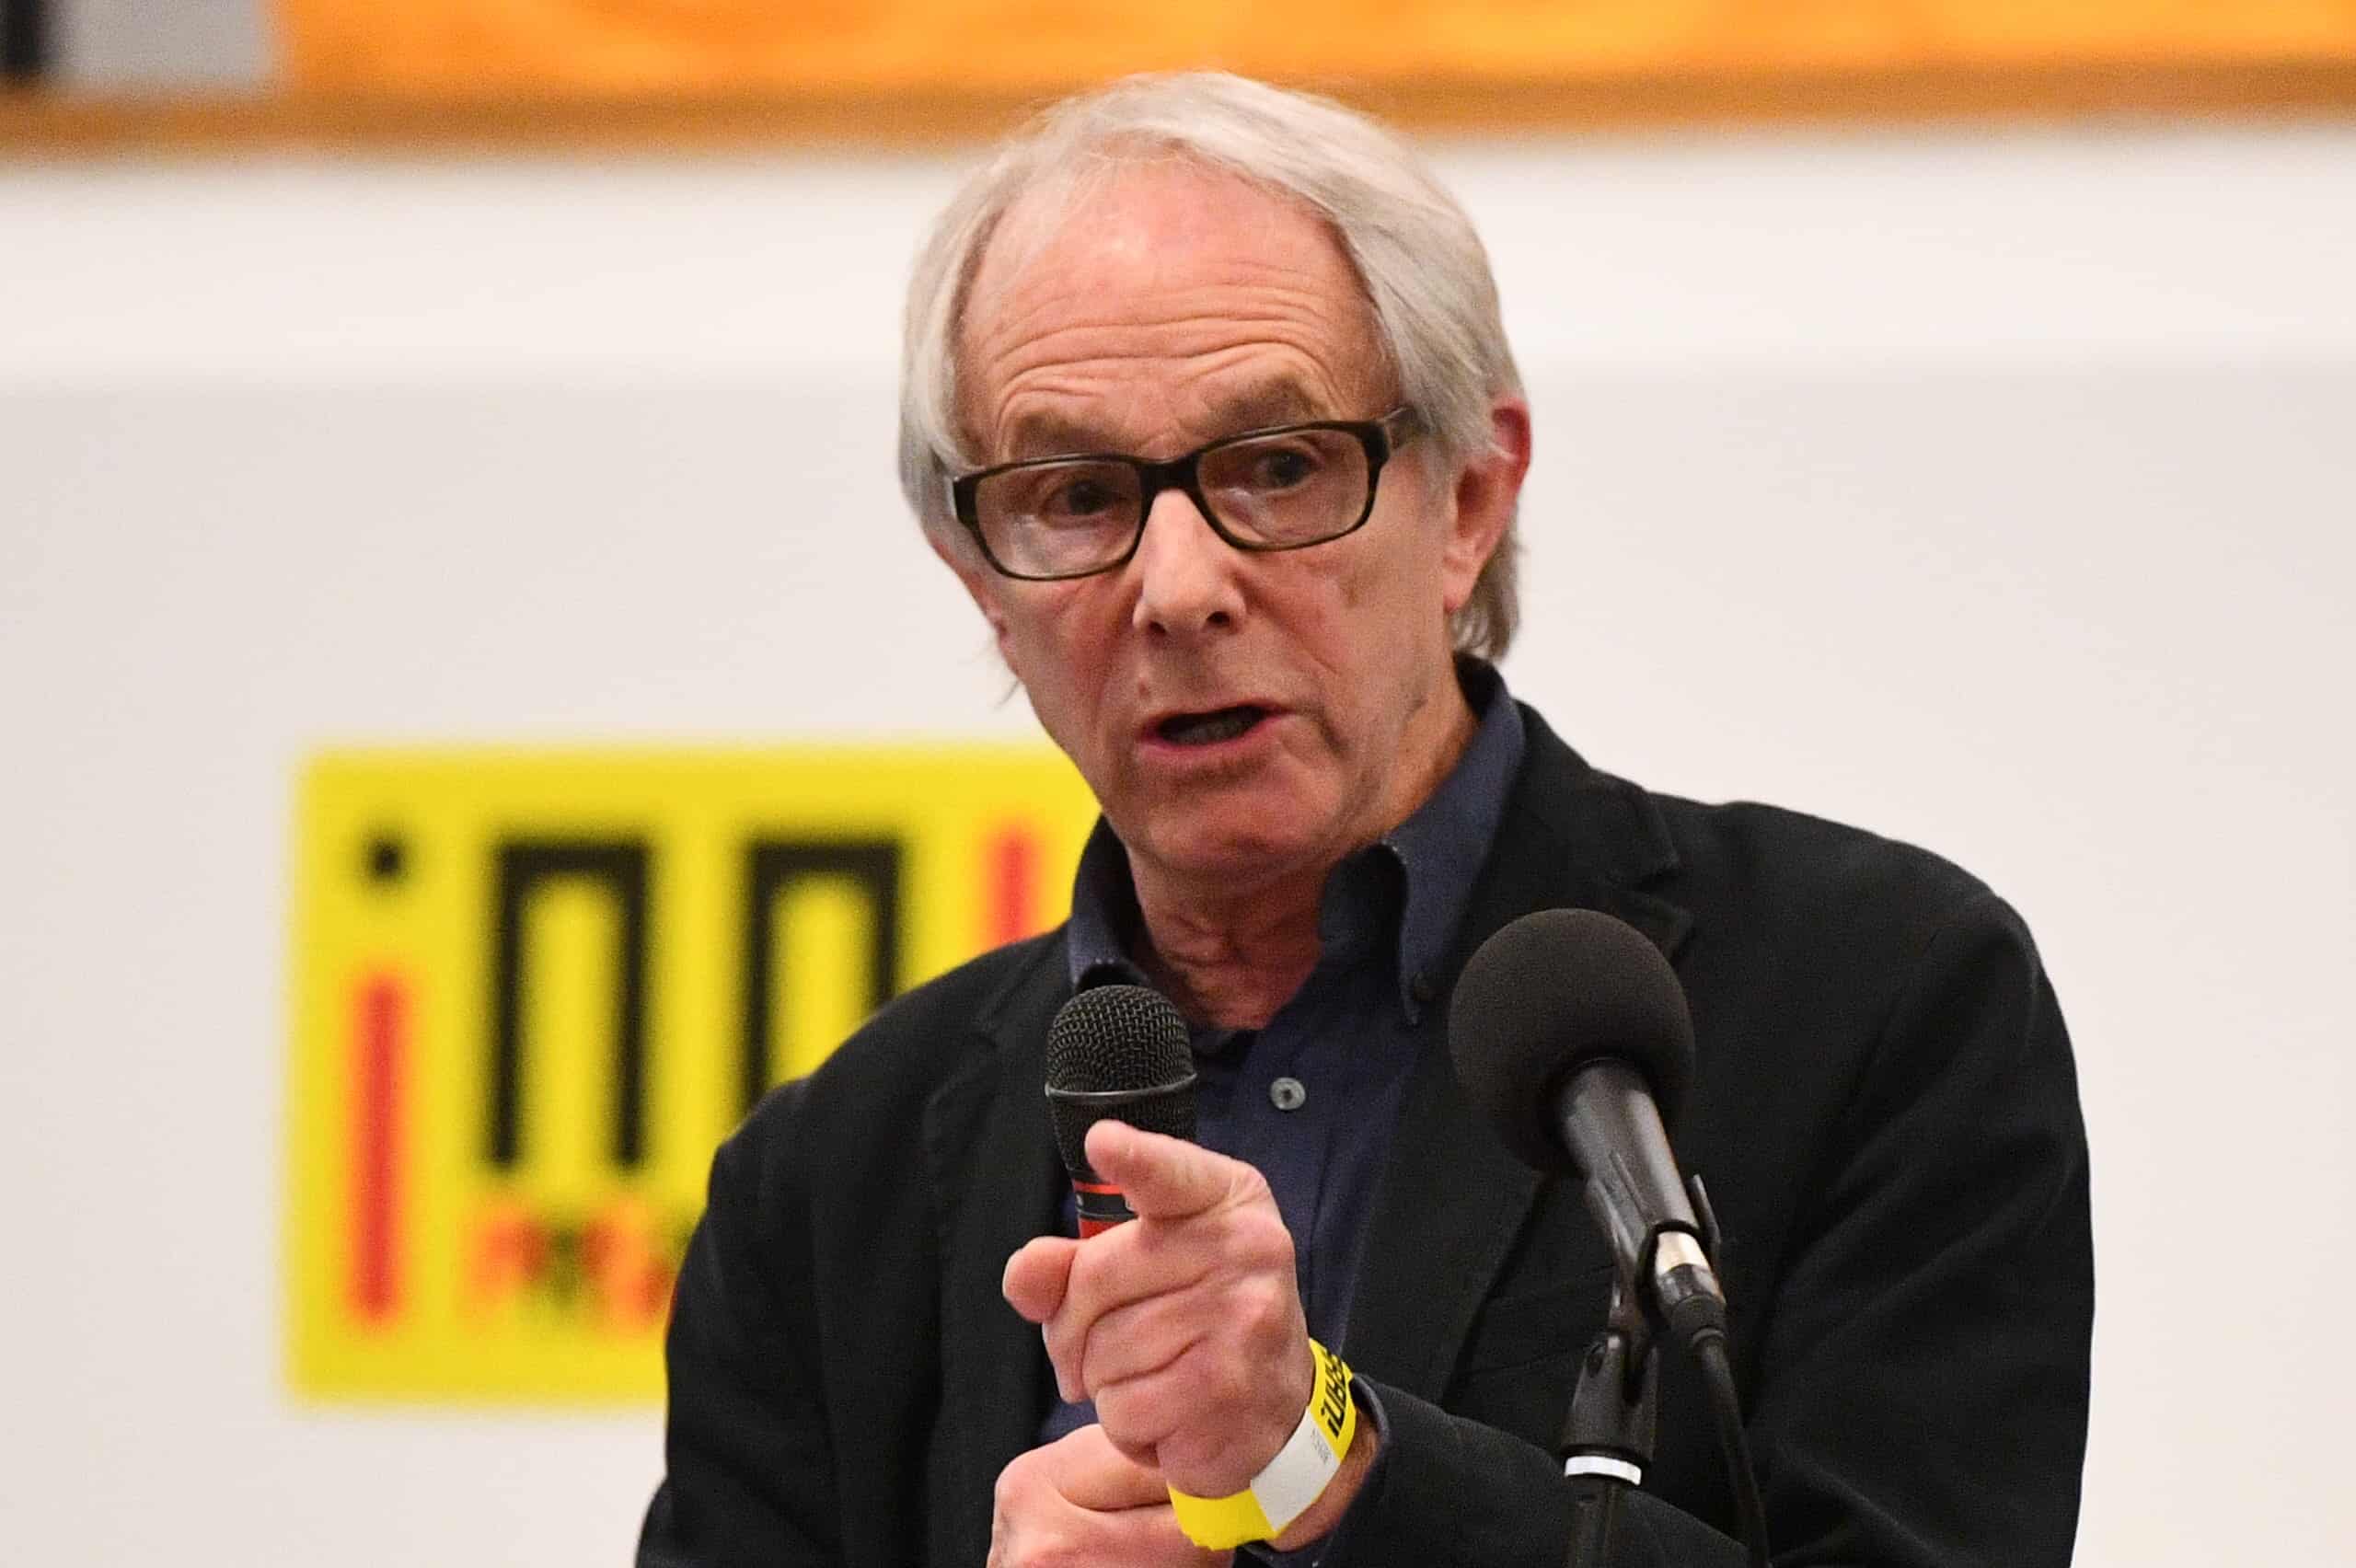 Ken Loach accuses Starmer of ‘treachery and dishonesty’ for wanting to get rid of the Labour left